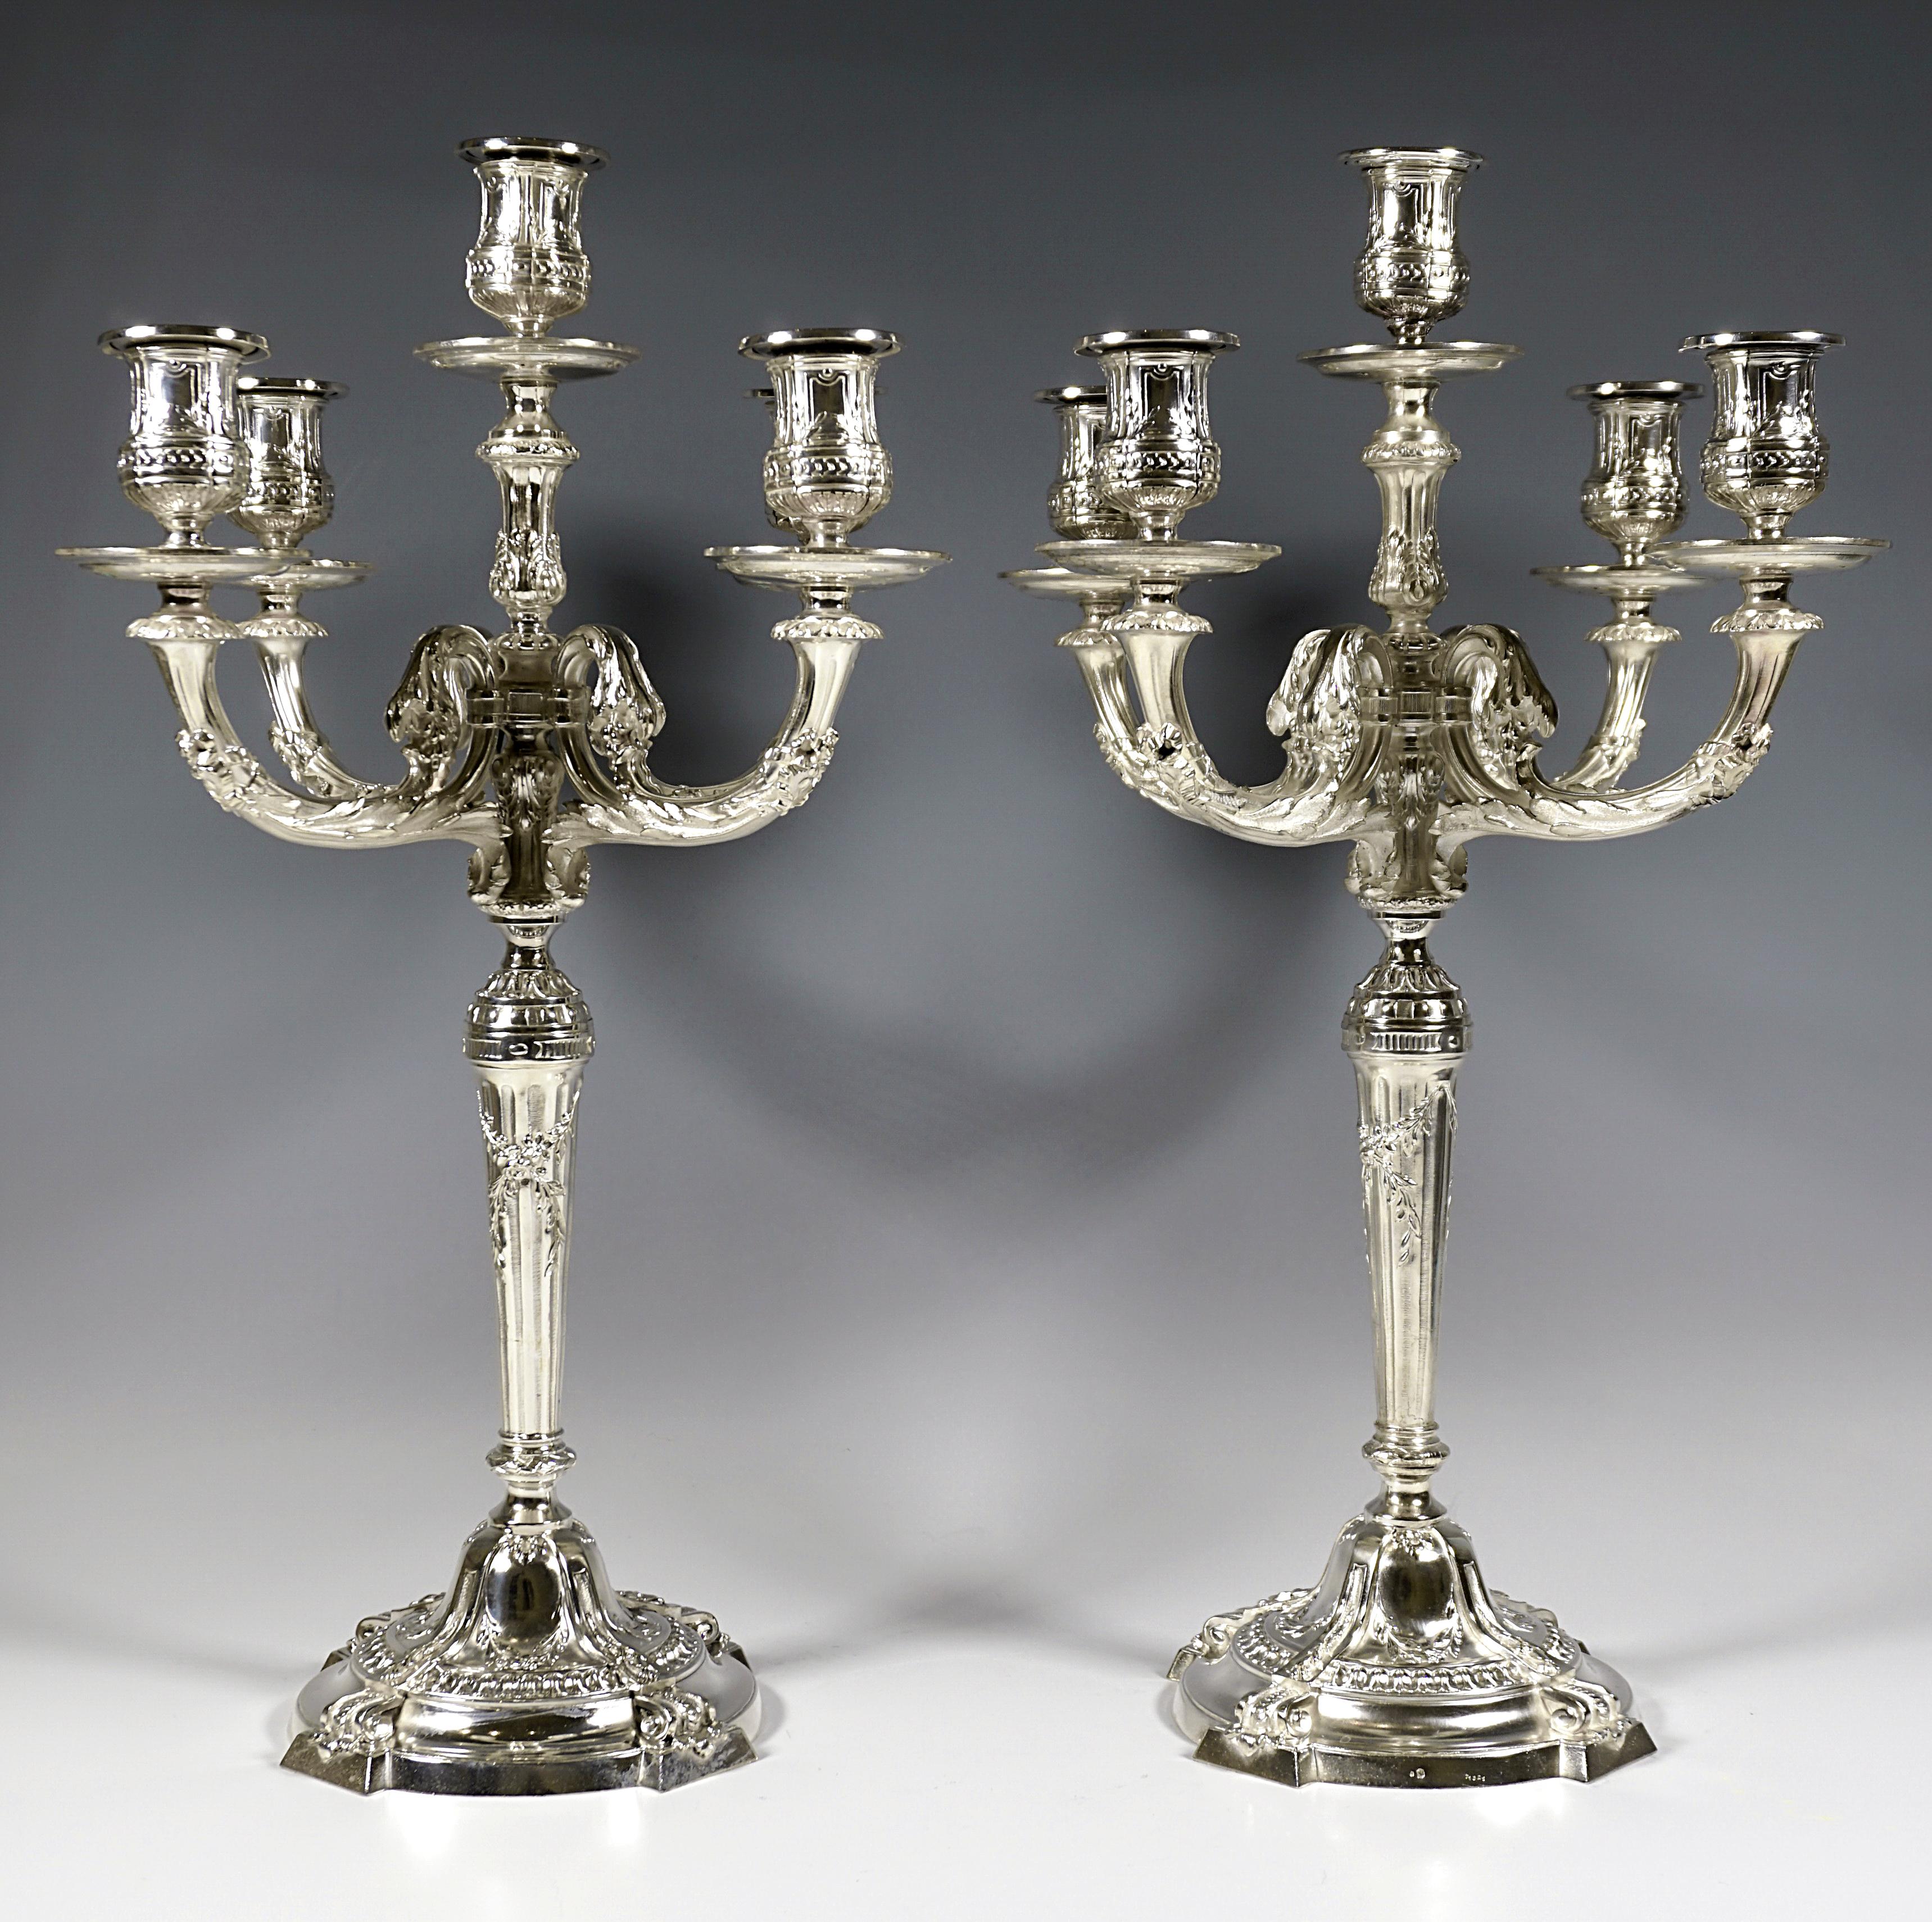 Two festive five-flame candelabras on a round, centrally raised foot, segmented by four applied pilasters with volute ends protruding over the rim, ring-shaped and radial relief bands, fluted shaft with leaf and flower festoons widening conically